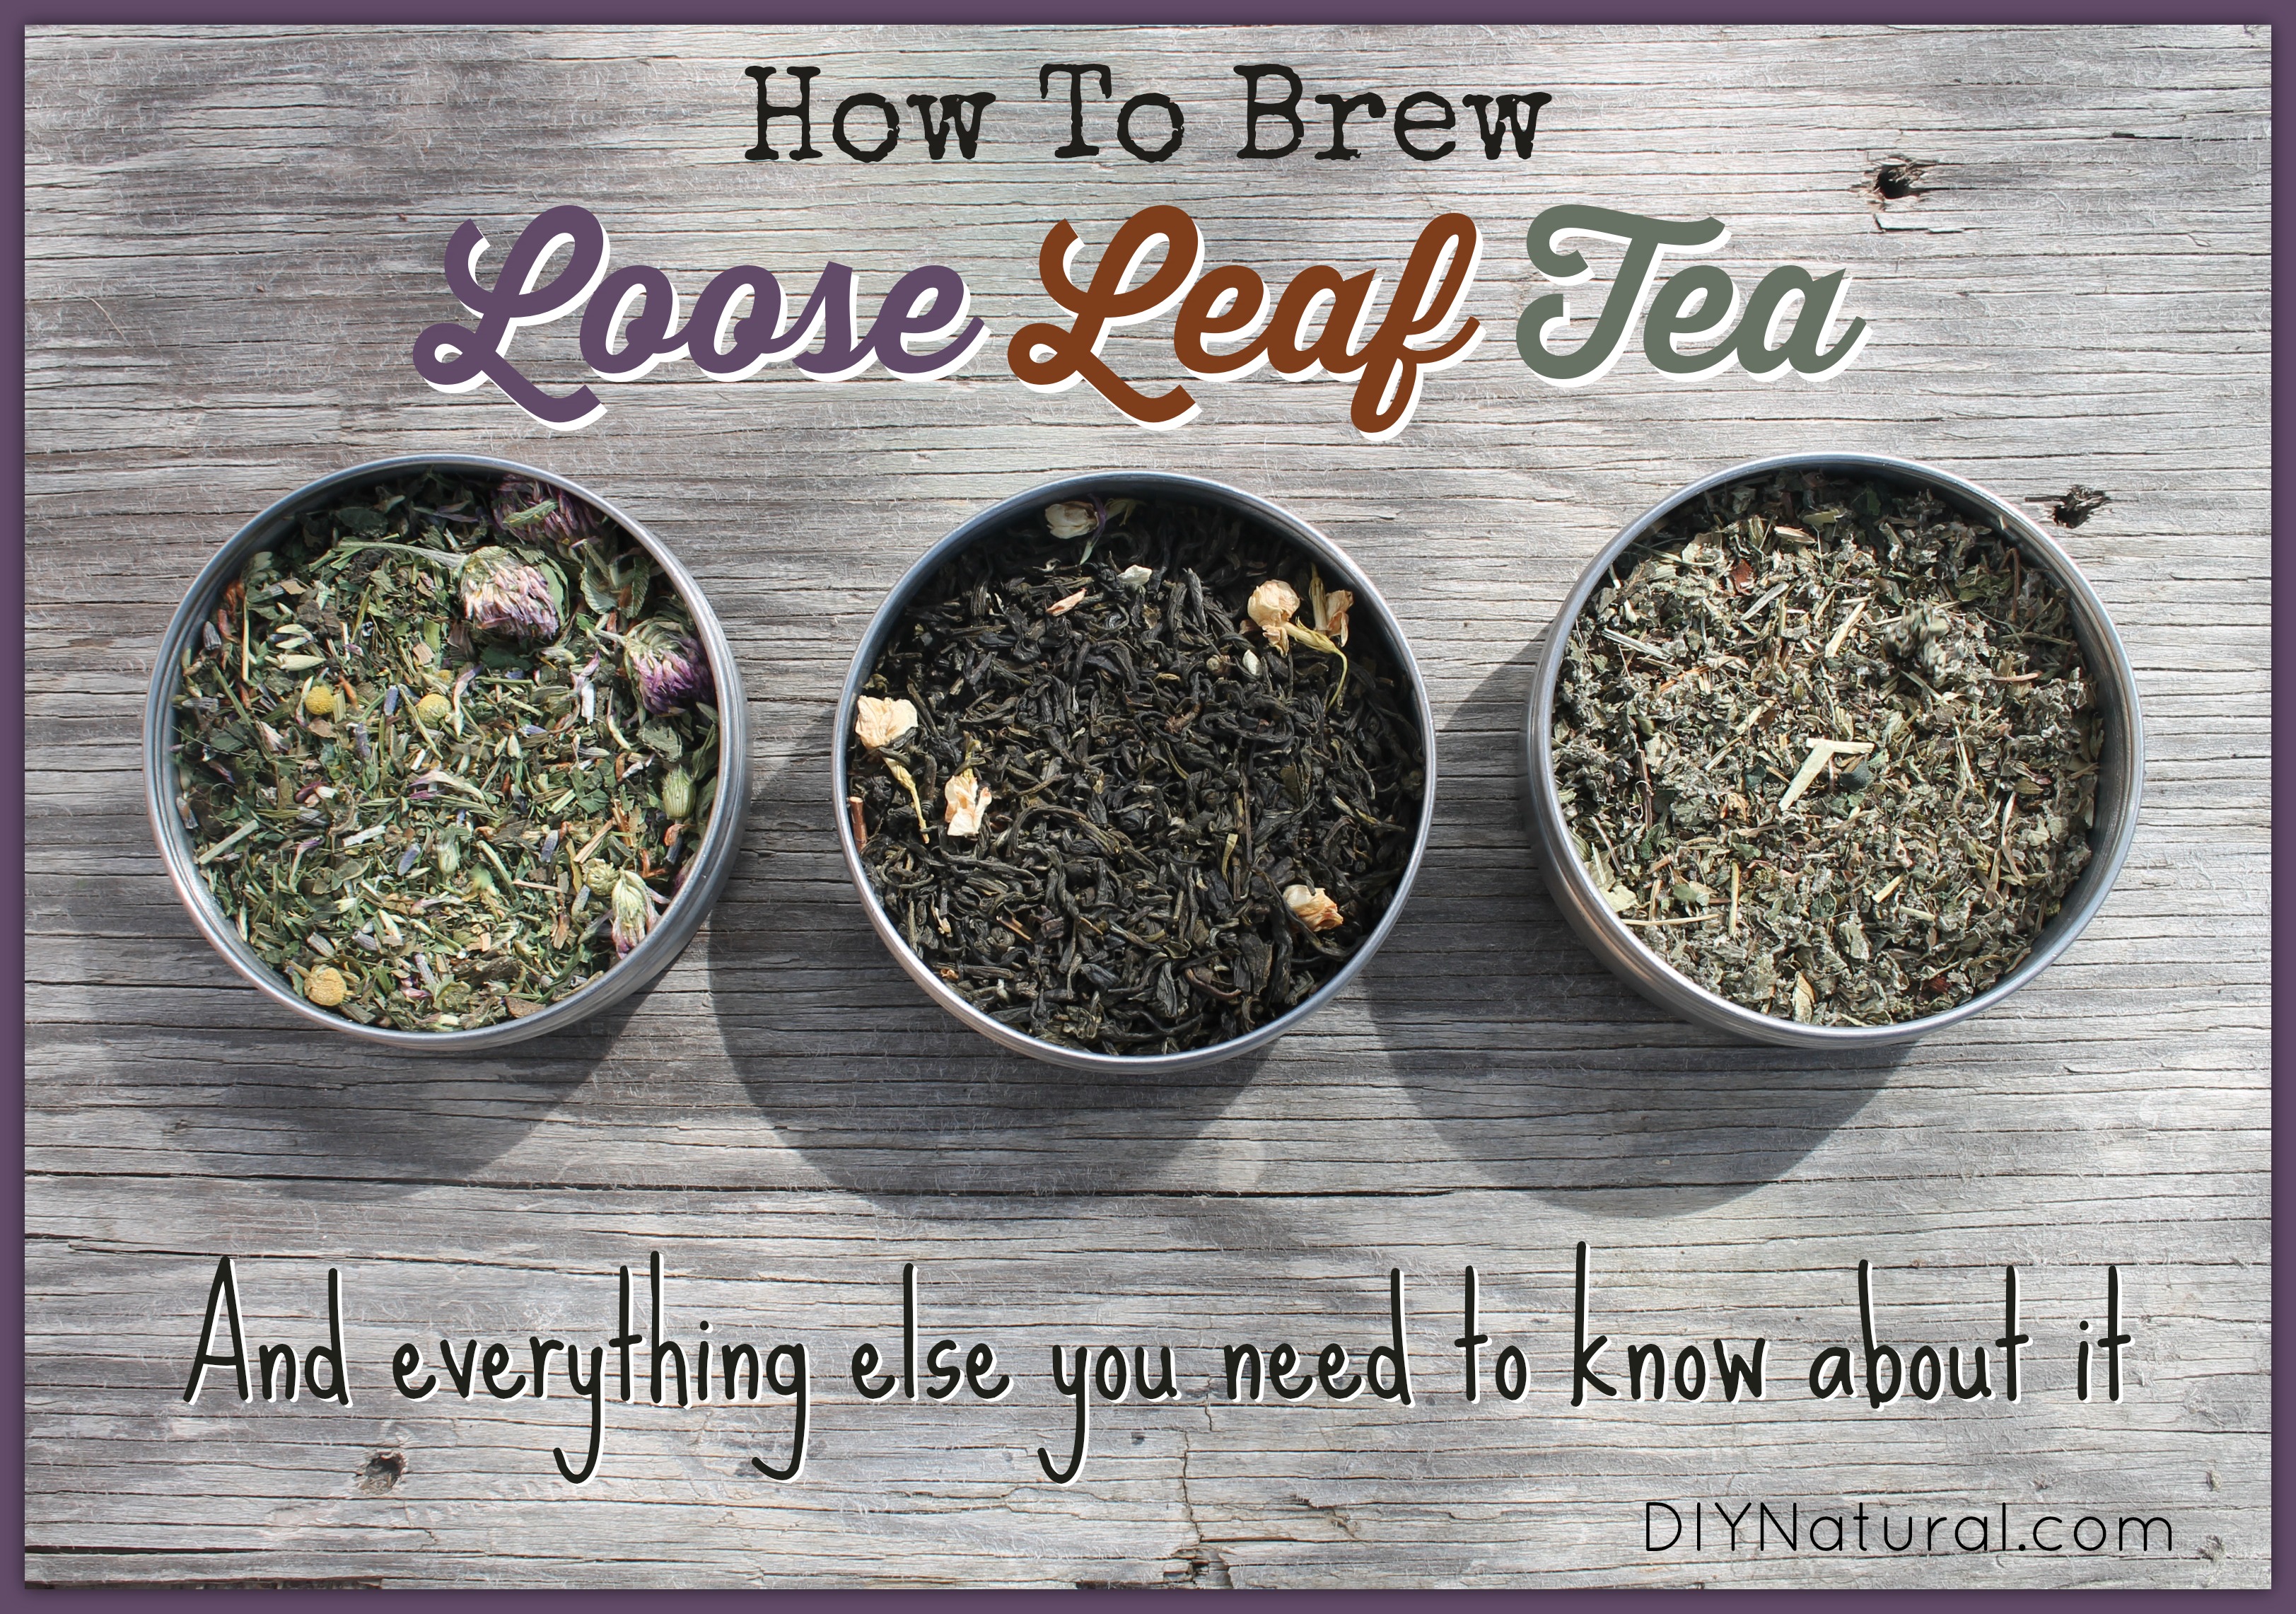 How To Brew Loose Leaf Tea and Everything You Need to Know About It